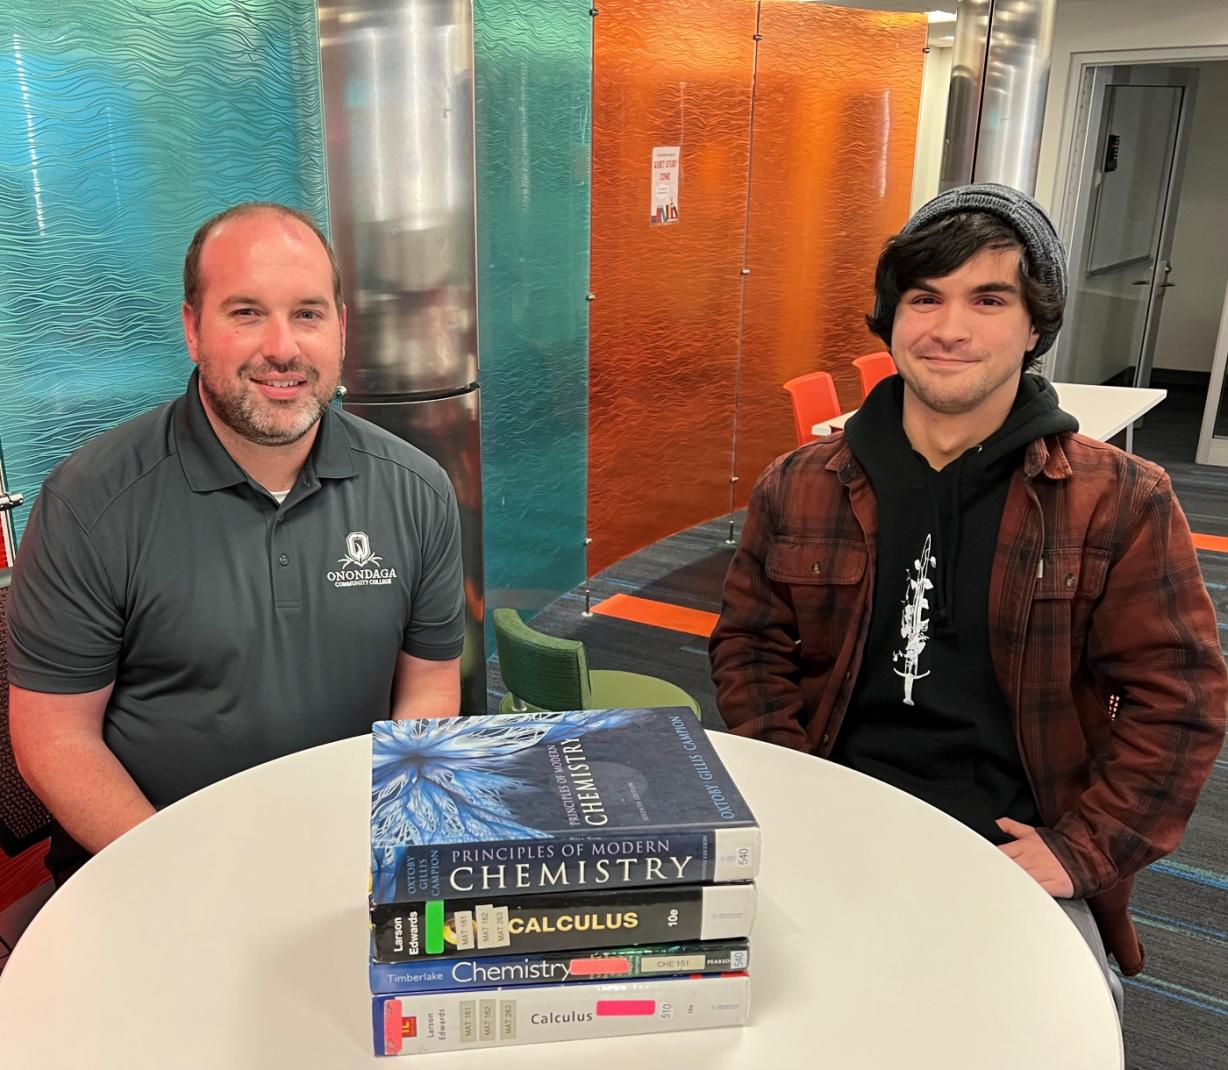 Students can take part in workshops and receive free tutoring through the Learning Center 7 days a week! Pictured are (left to right) Learning Center Director Ted Mathews and student Nick Chai who tutors Chemistry and Calculus there.